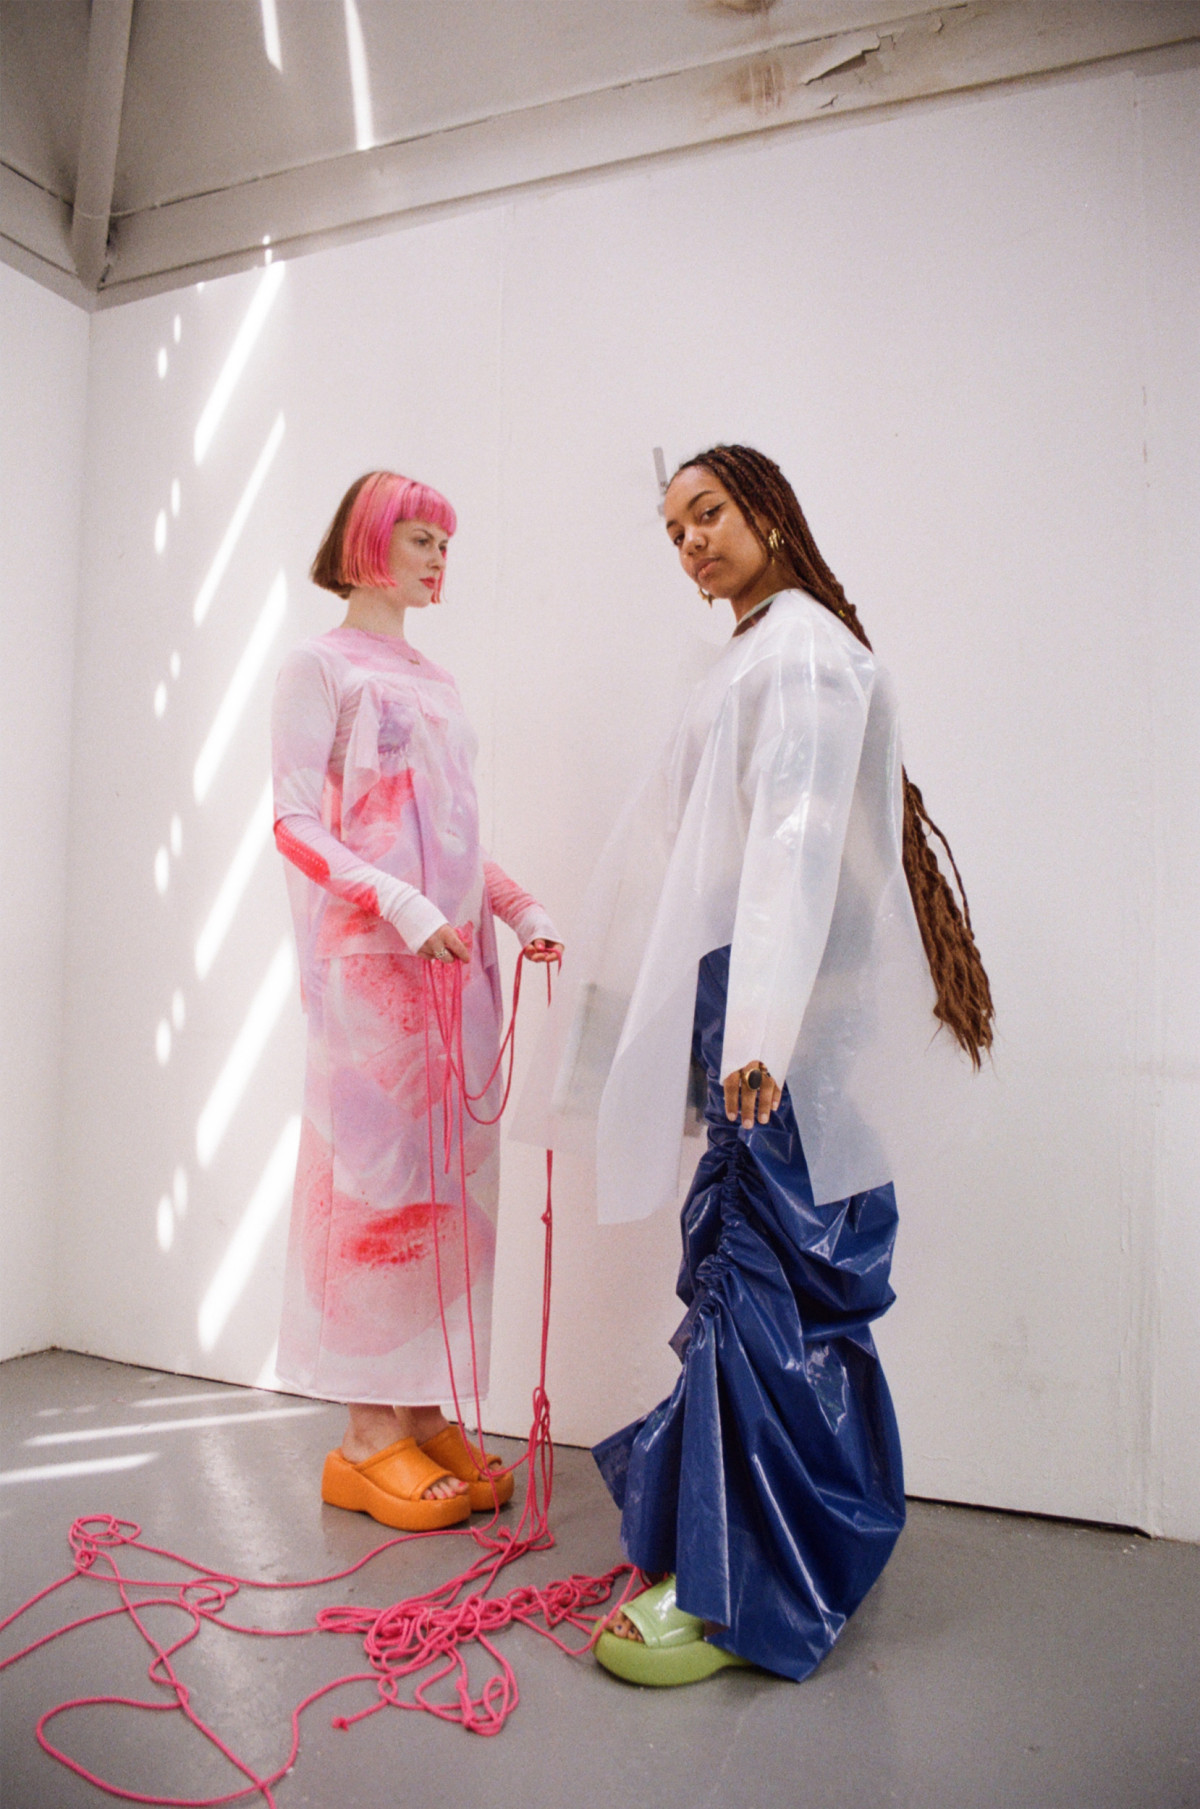 Models: Lauryn Creamer Nwadike and Emily Bourker. Photographer: Lucy Folan